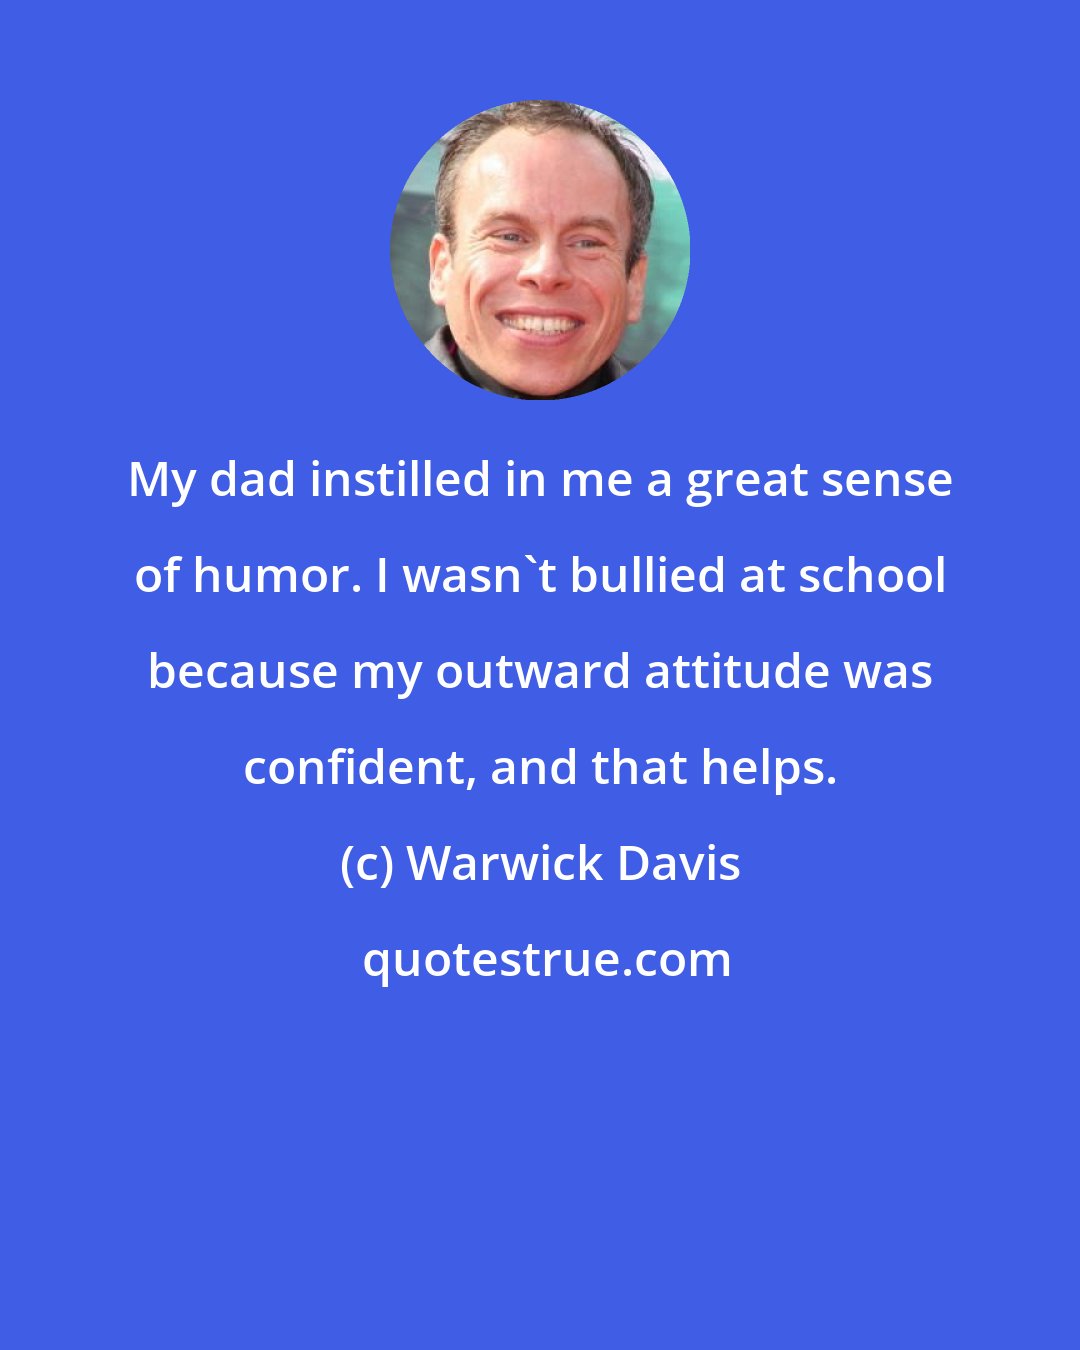 Warwick Davis: My dad instilled in me a great sense of humor. I wasn't bullied at school because my outward attitude was confident, and that helps.